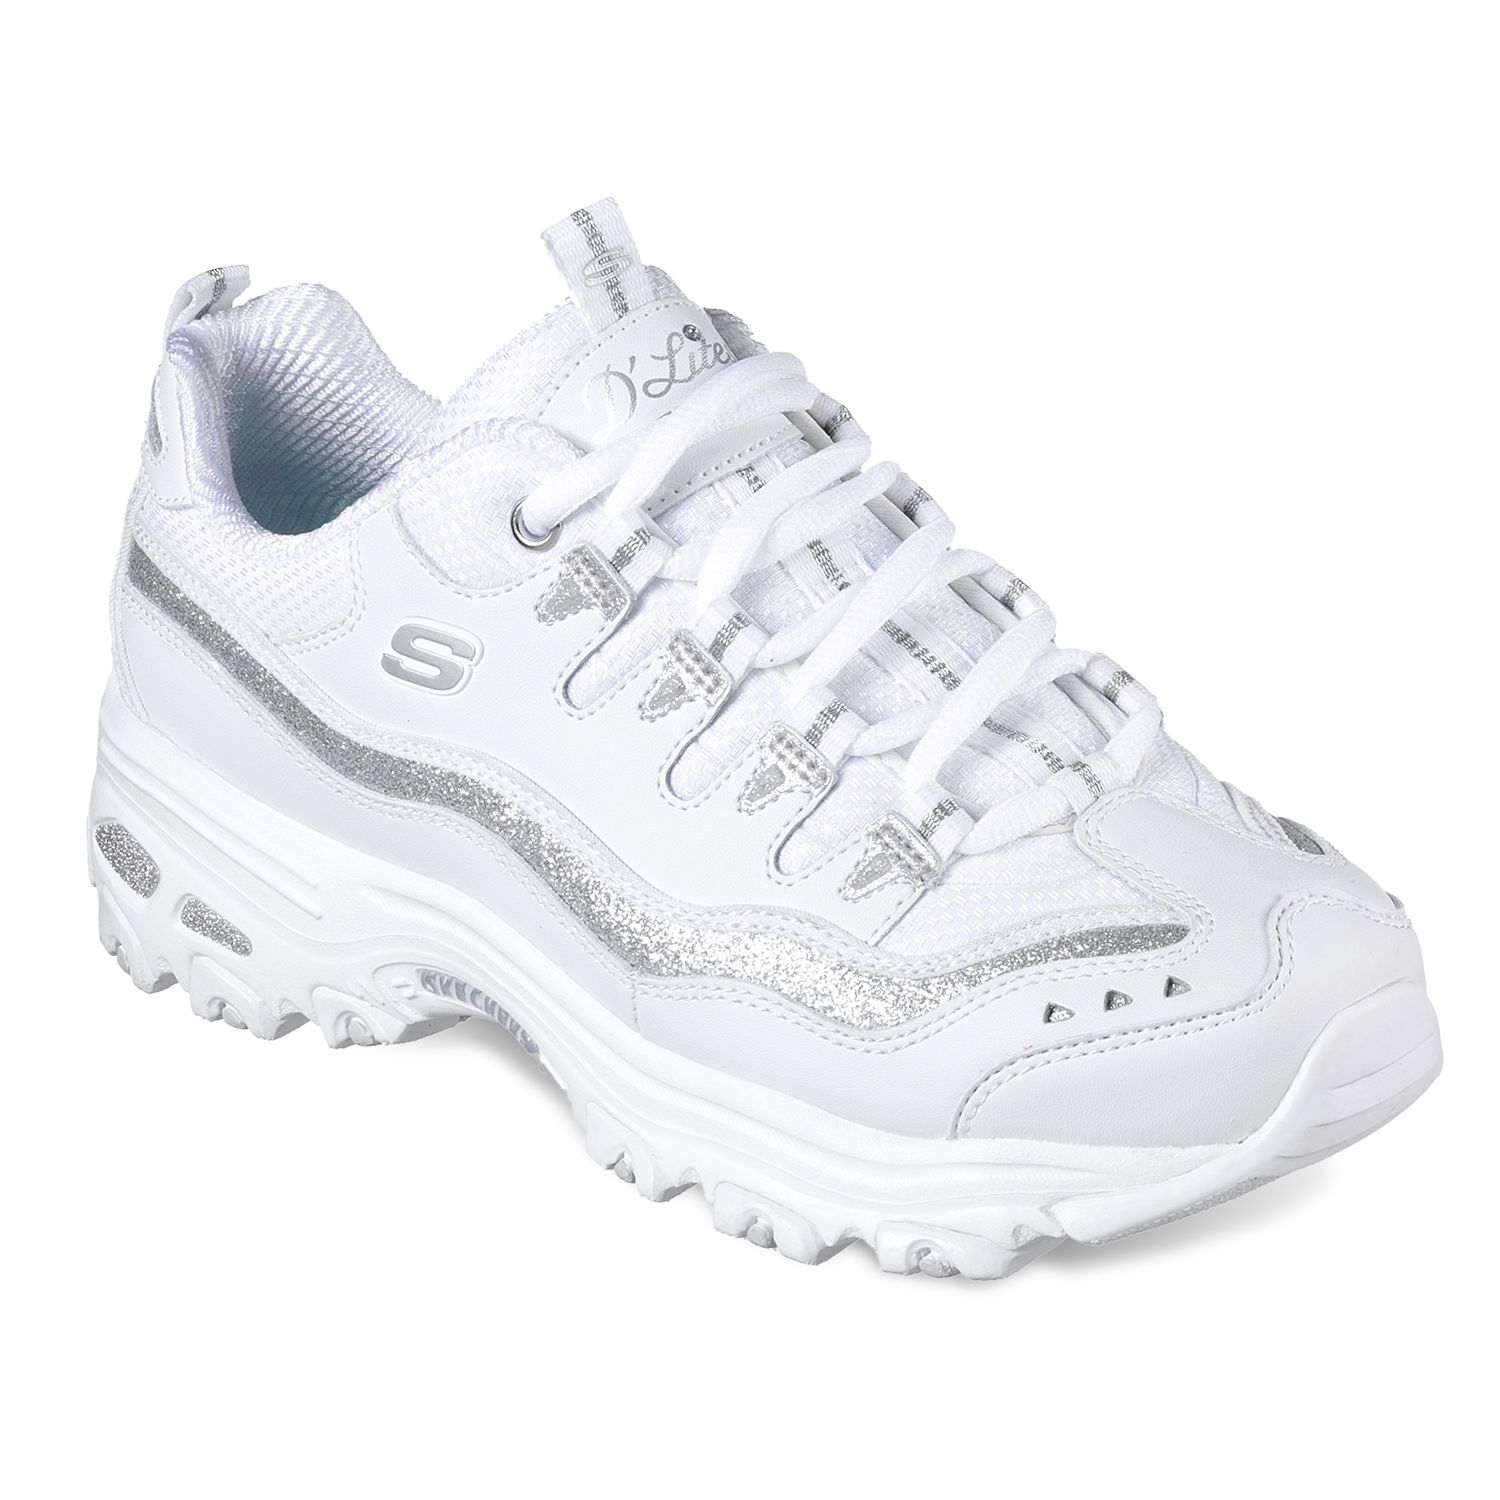 Skechers D'Lites Now and Then Women's Shoes